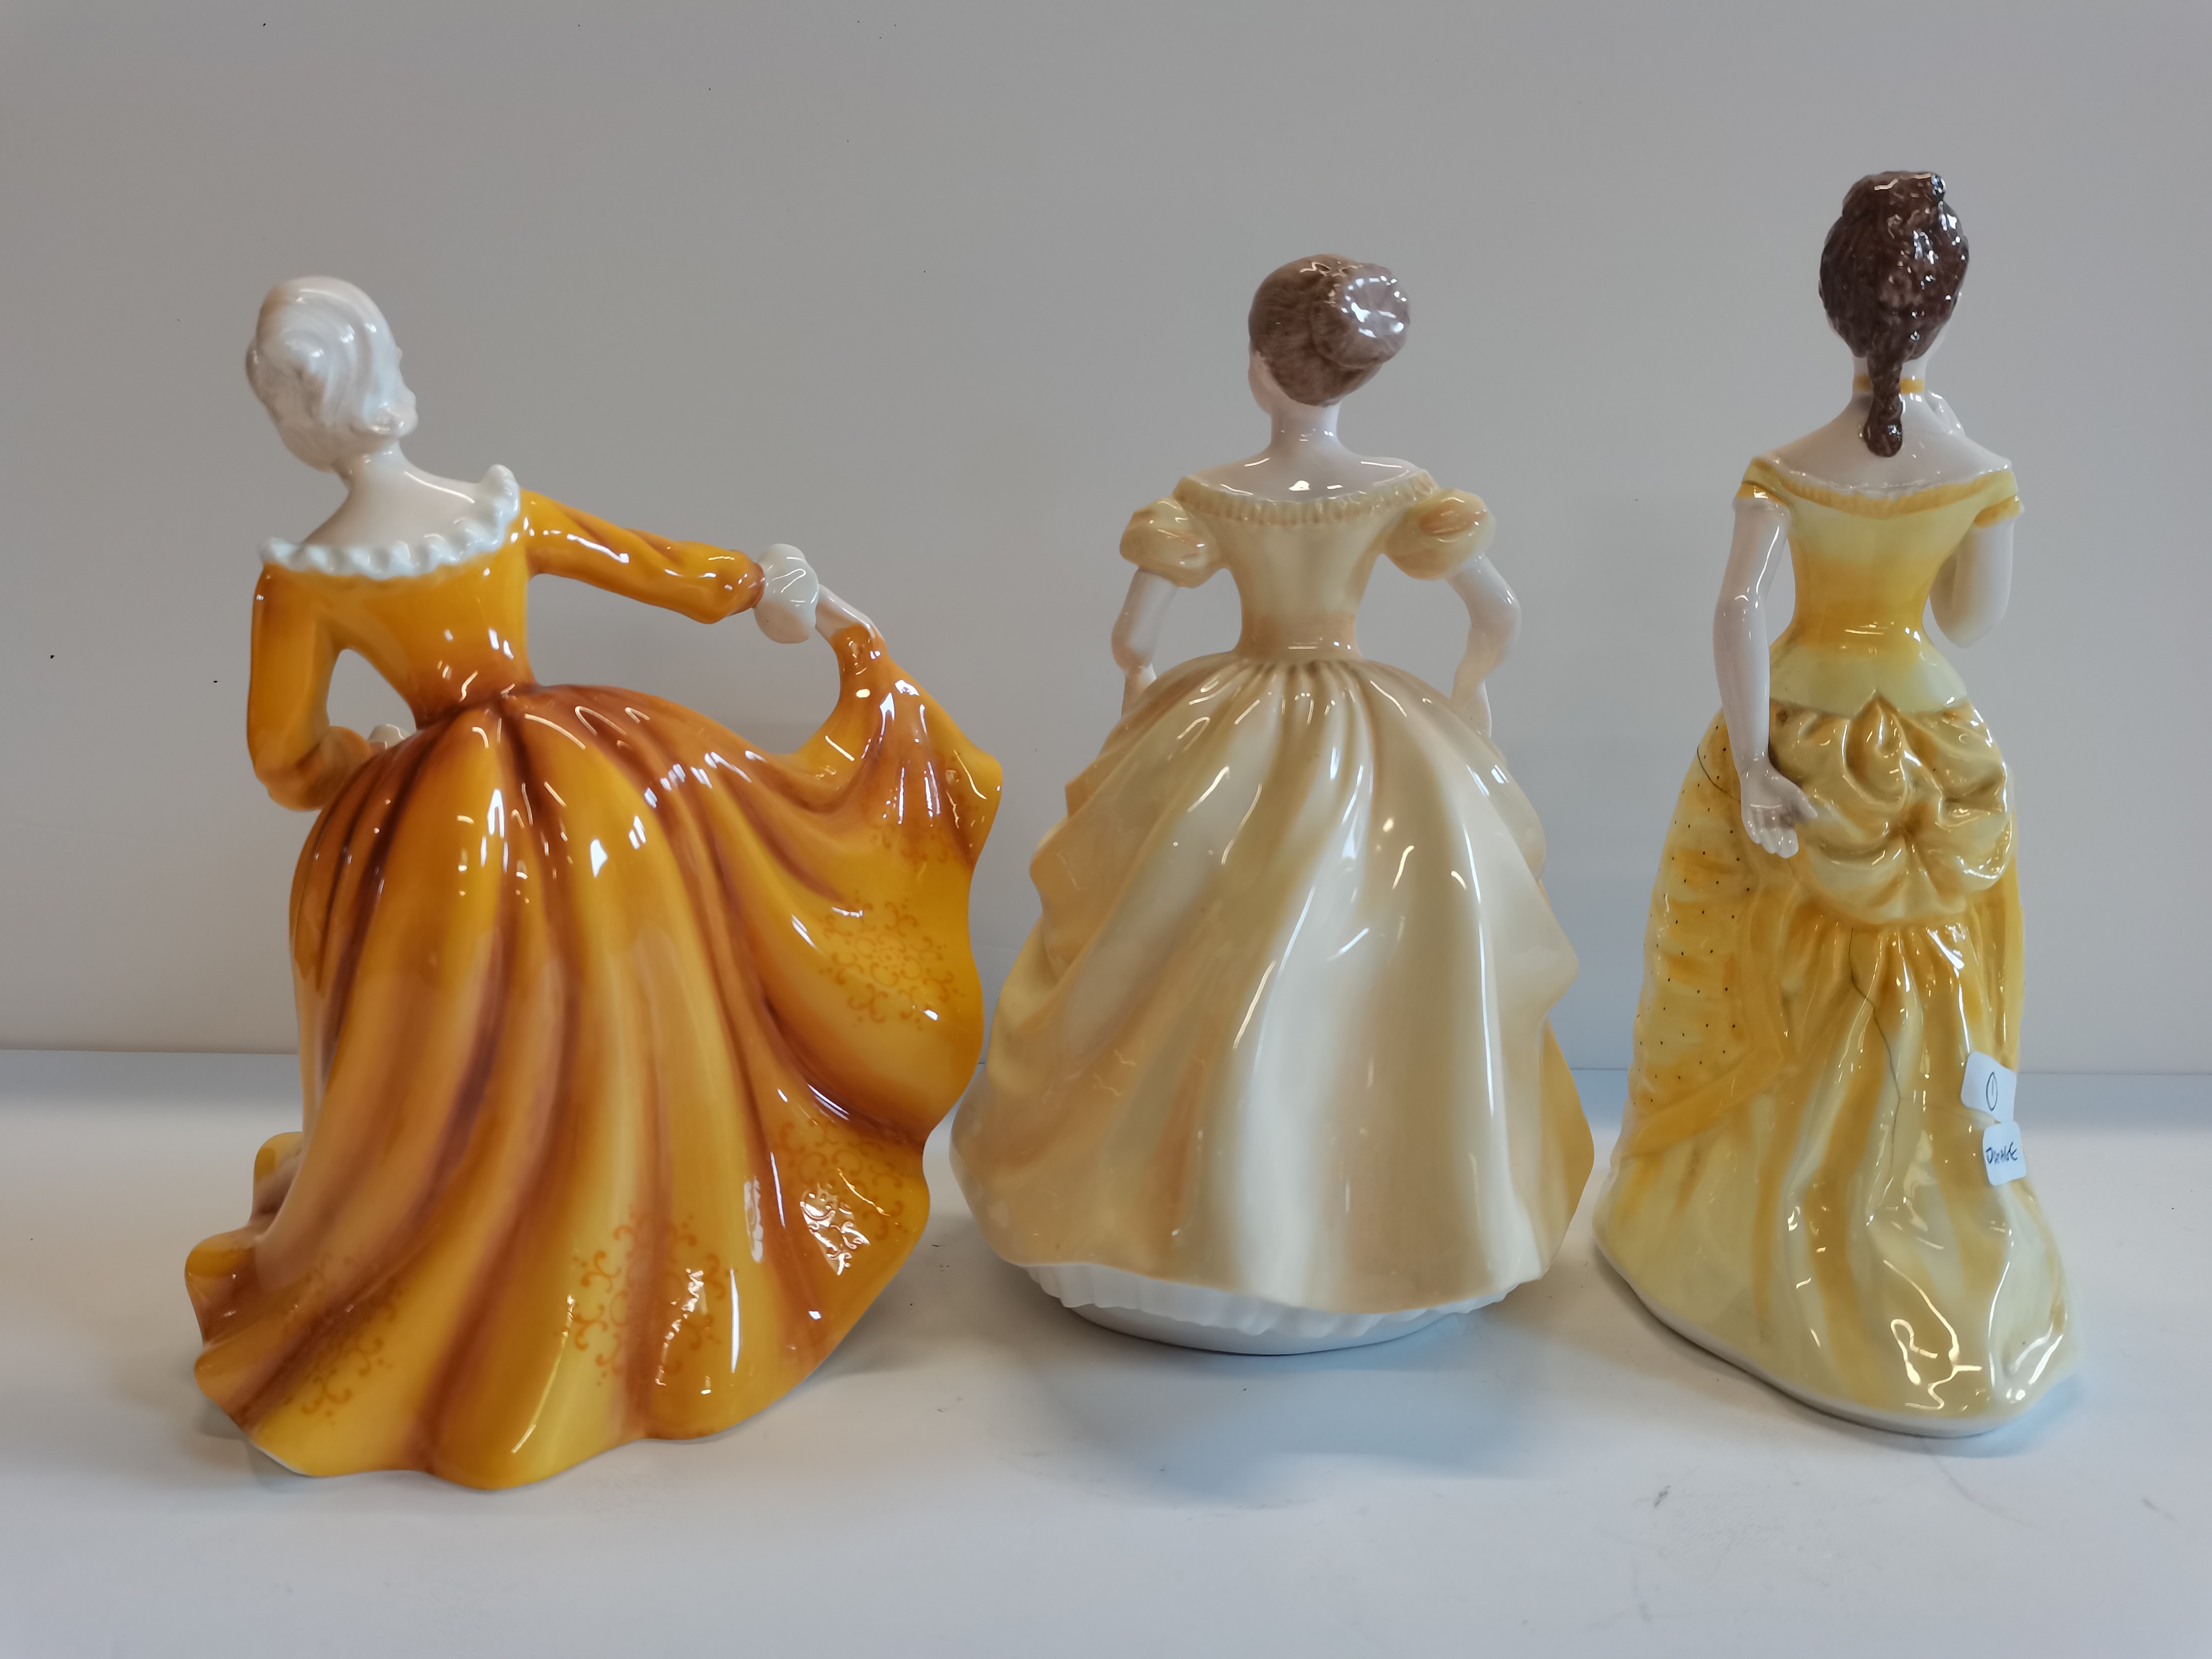 X2 Coalport ladies - Frances, Ladies of Fashion 'Emily' and Royal Doulton lady 'Kirsty' - Image 3 of 12